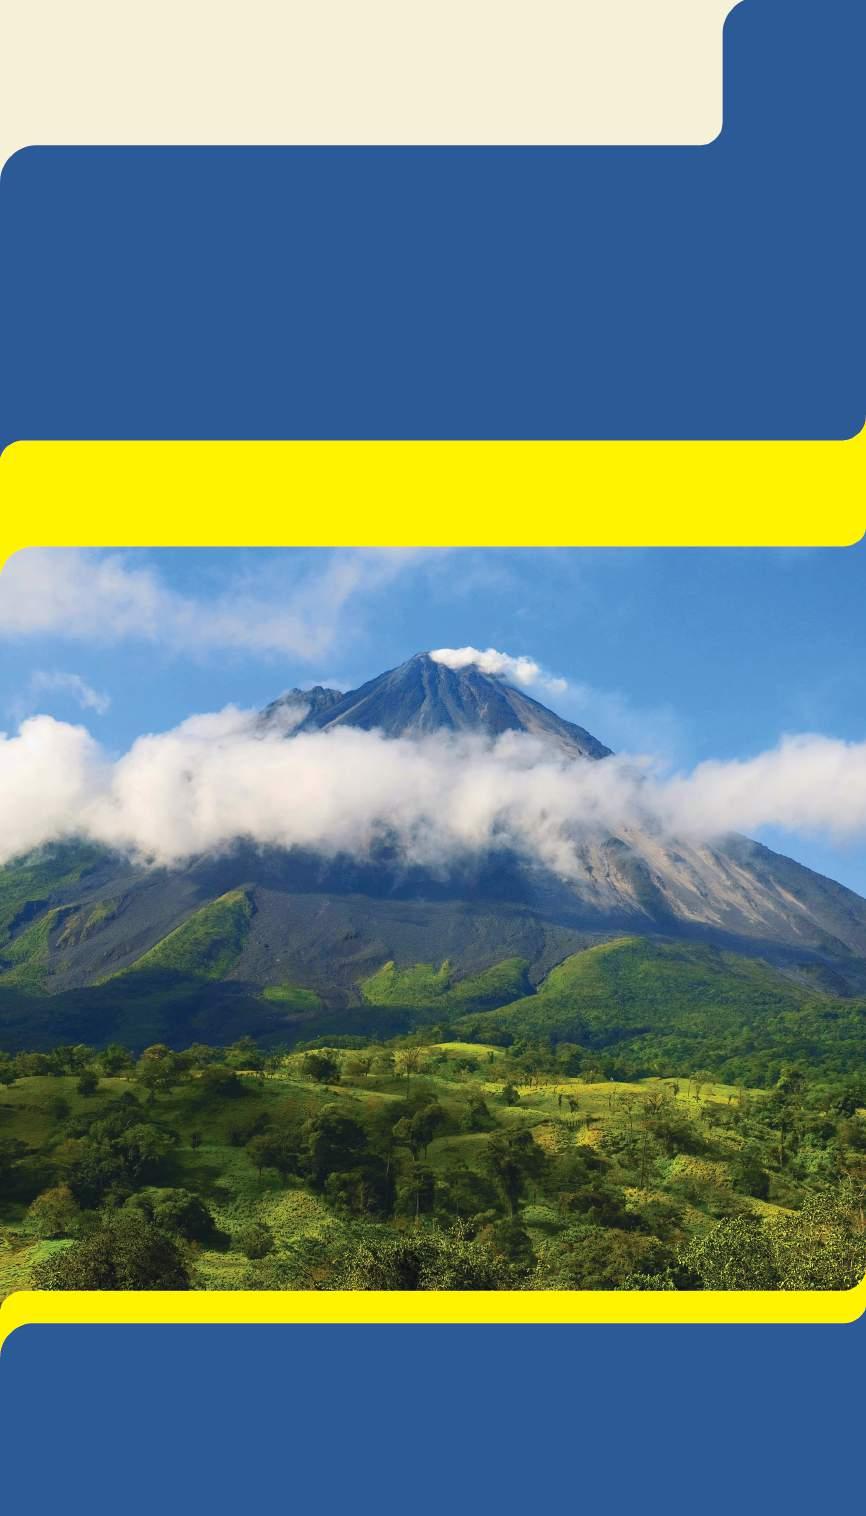 Temple Travels presents COSTA RICA S NATURAL HERITAGE March 2-13, 2015